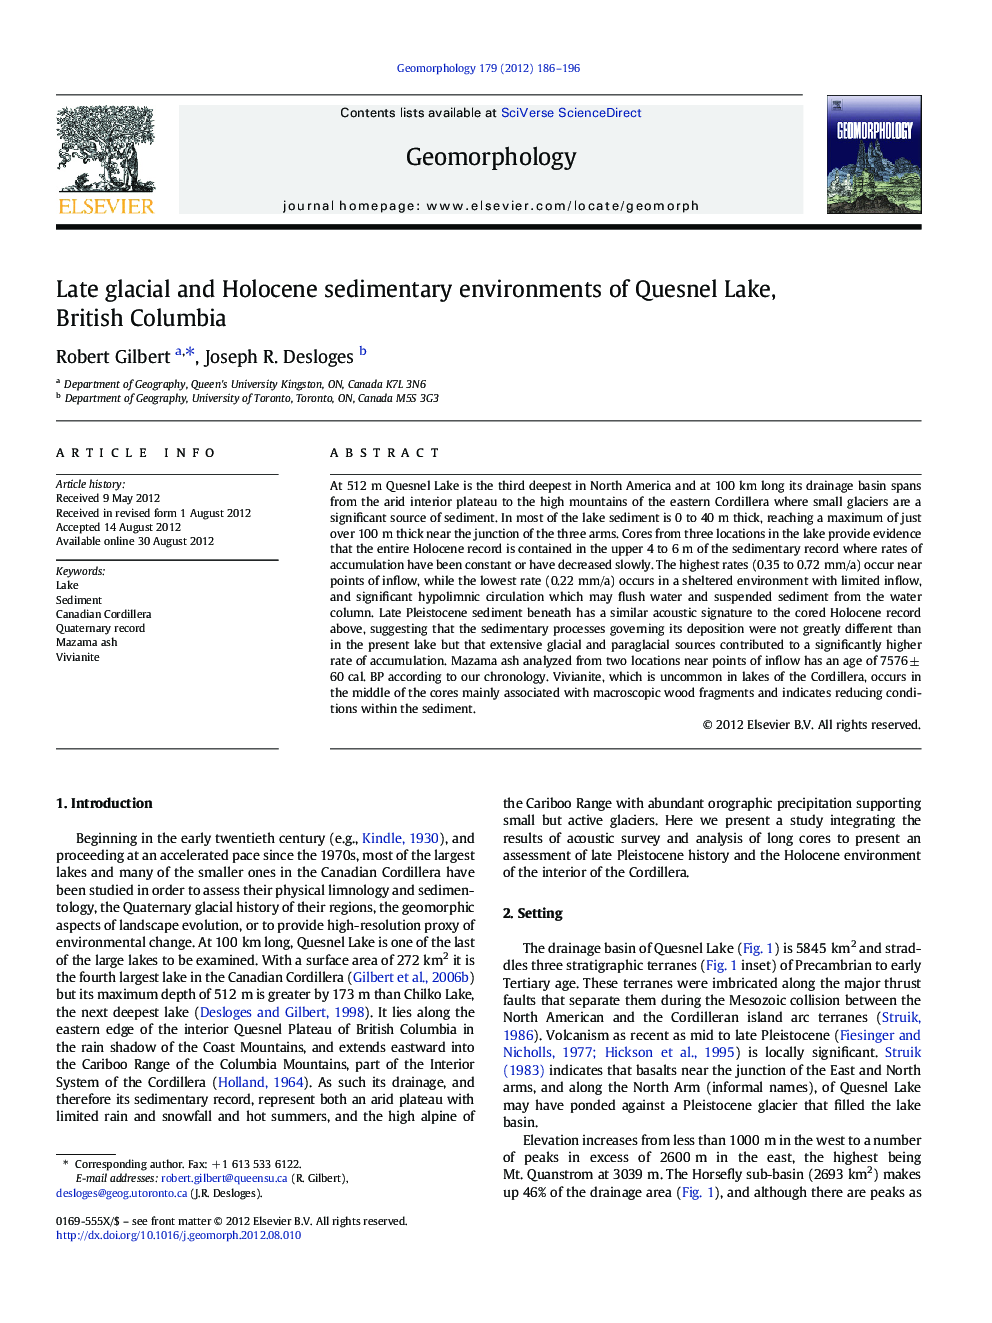 Late glacial and Holocene sedimentary environments of Quesnel Lake, British Columbia